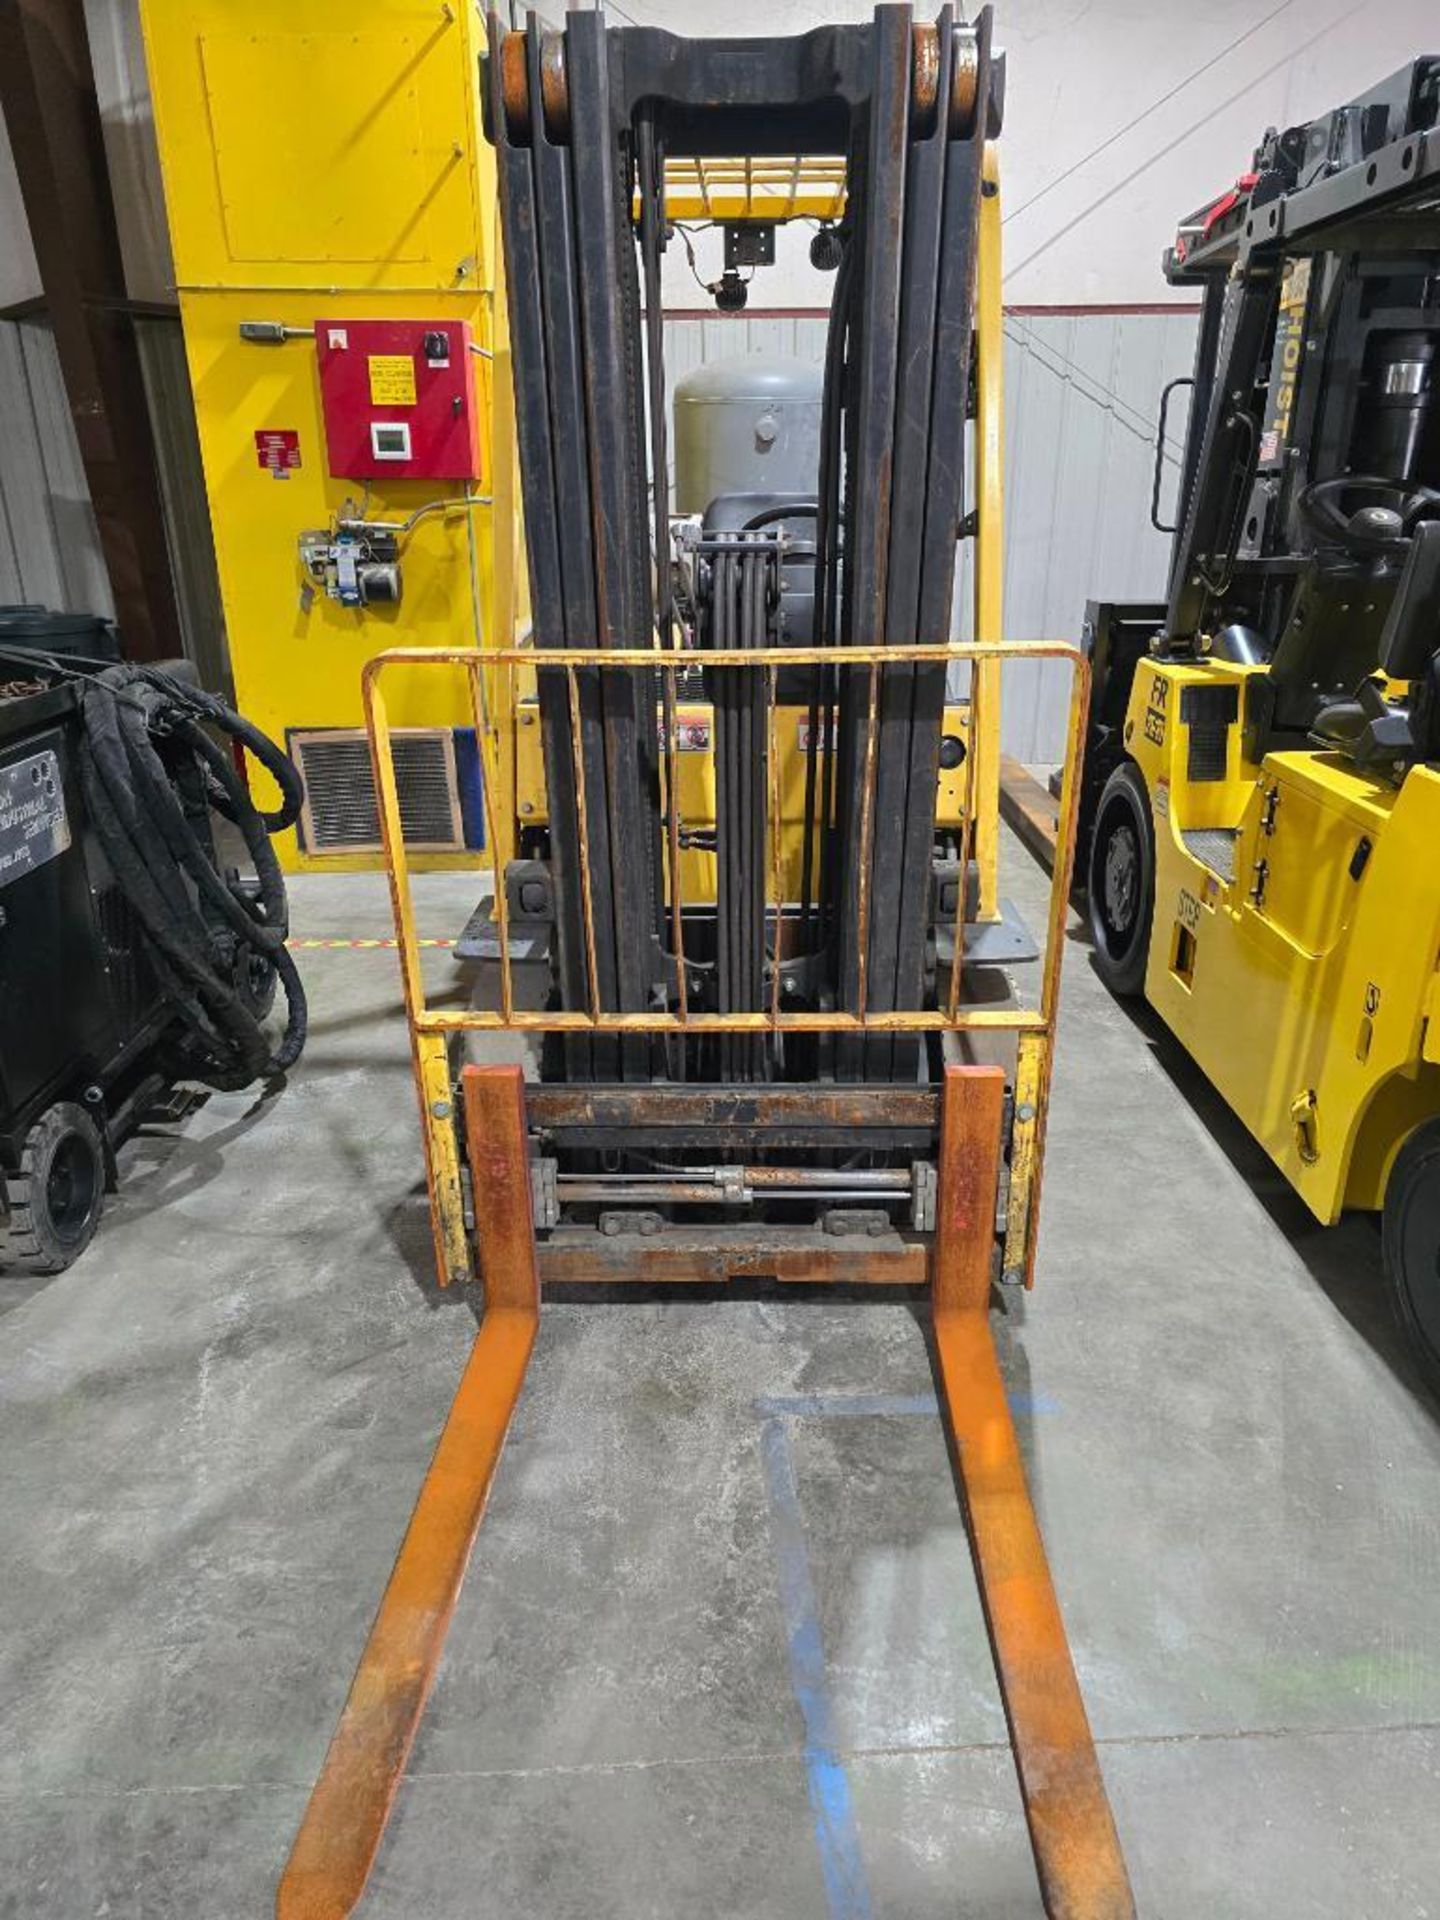 2018 Hyster H50XT 5,000 LB. Forklift, S/N A380V06798S, 195" Lift Height, Solid Cushion Tires, Sidesh - Image 11 of 13